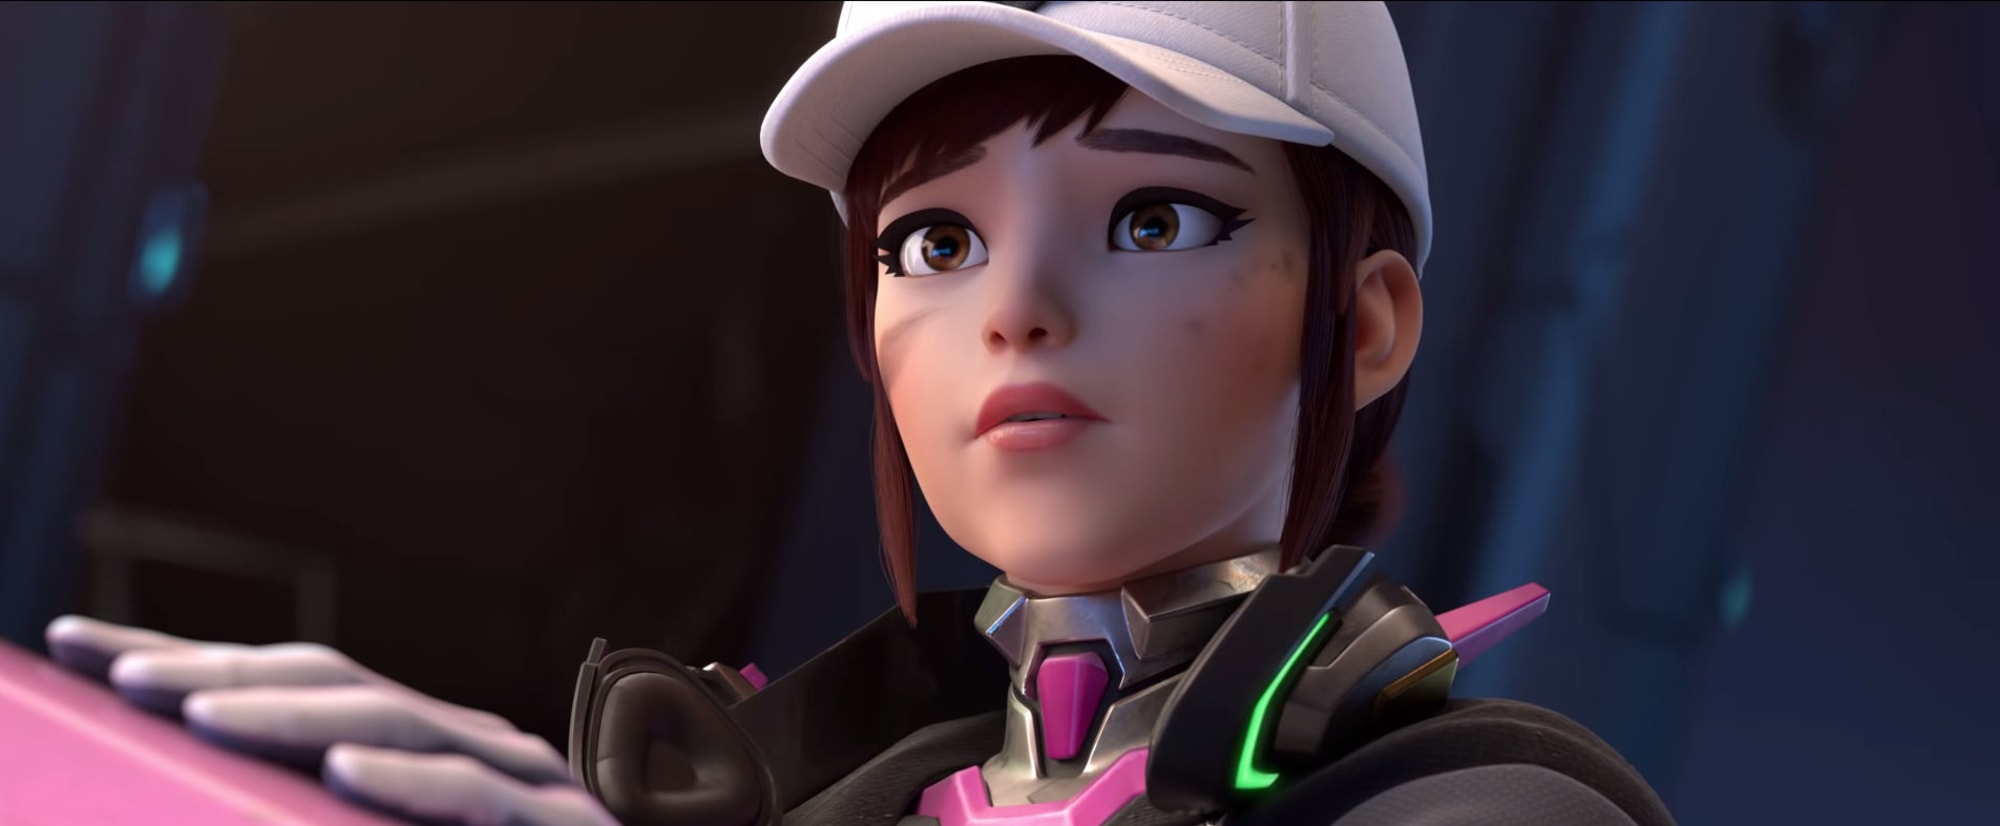 Overwatch:  takes to the skies in new animated short